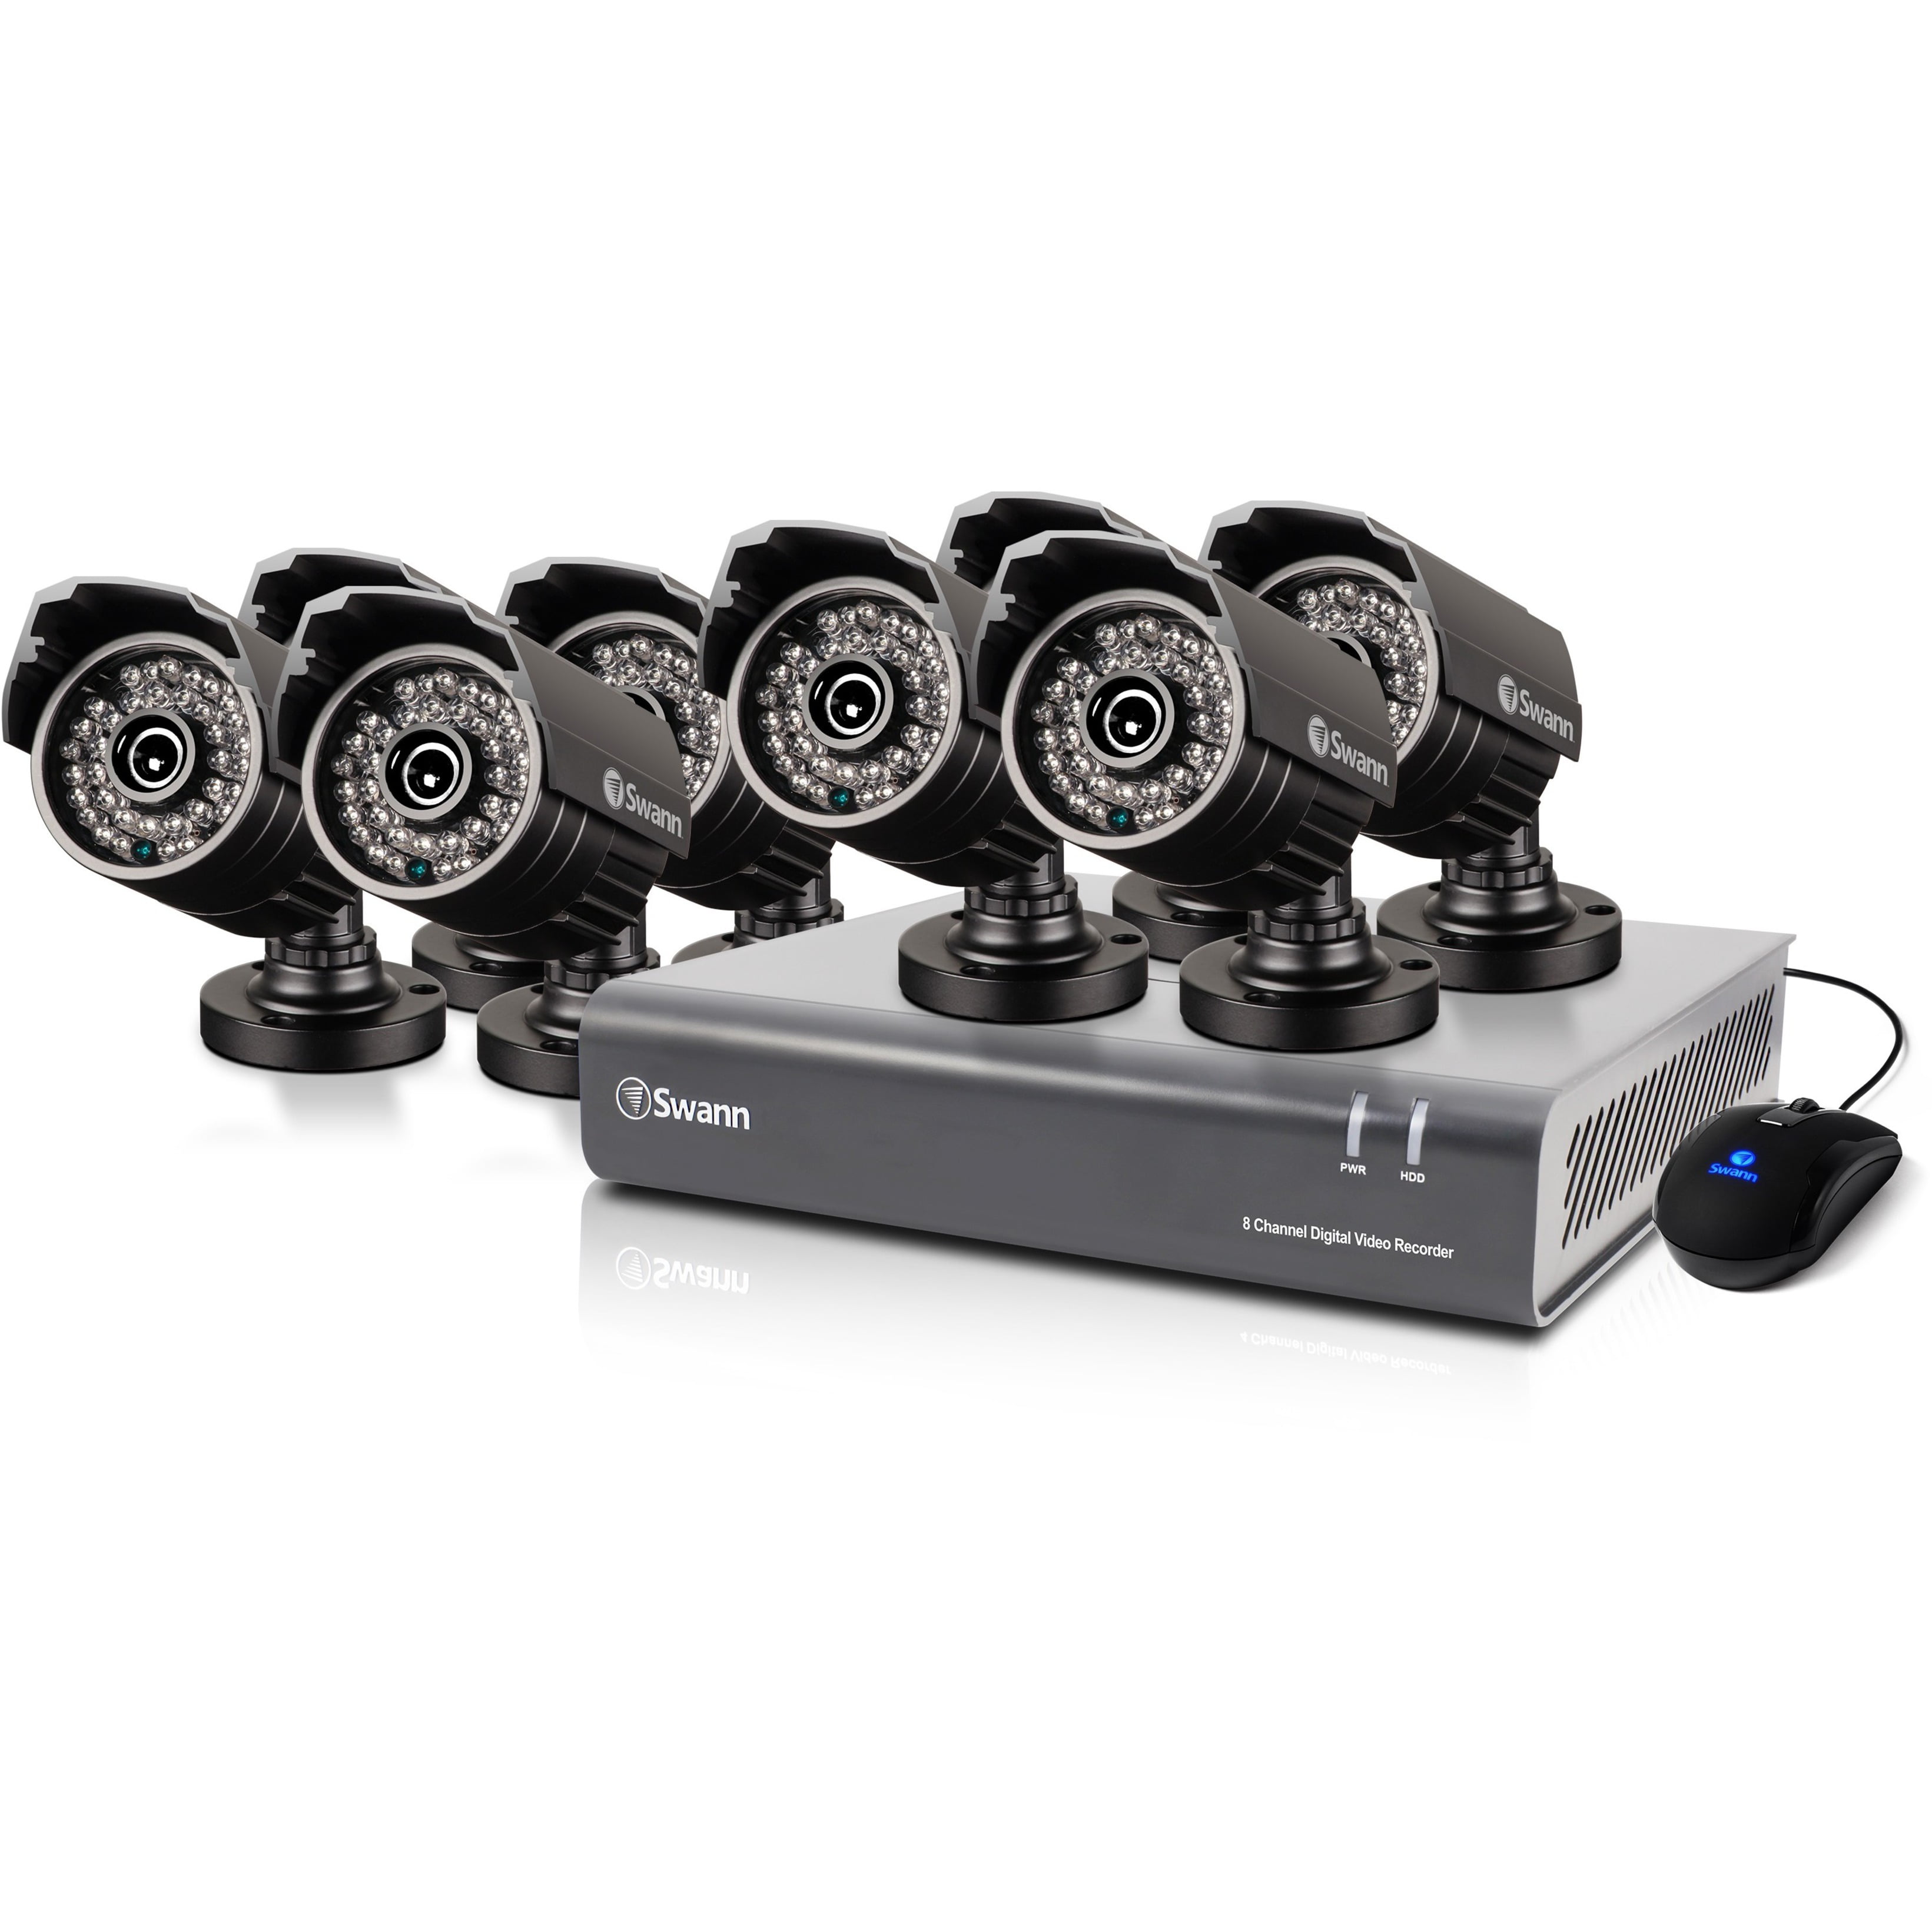 Swann DVR Compatible Bullet CCTV Security Camera 1.3MP 720p Day Night Vision 